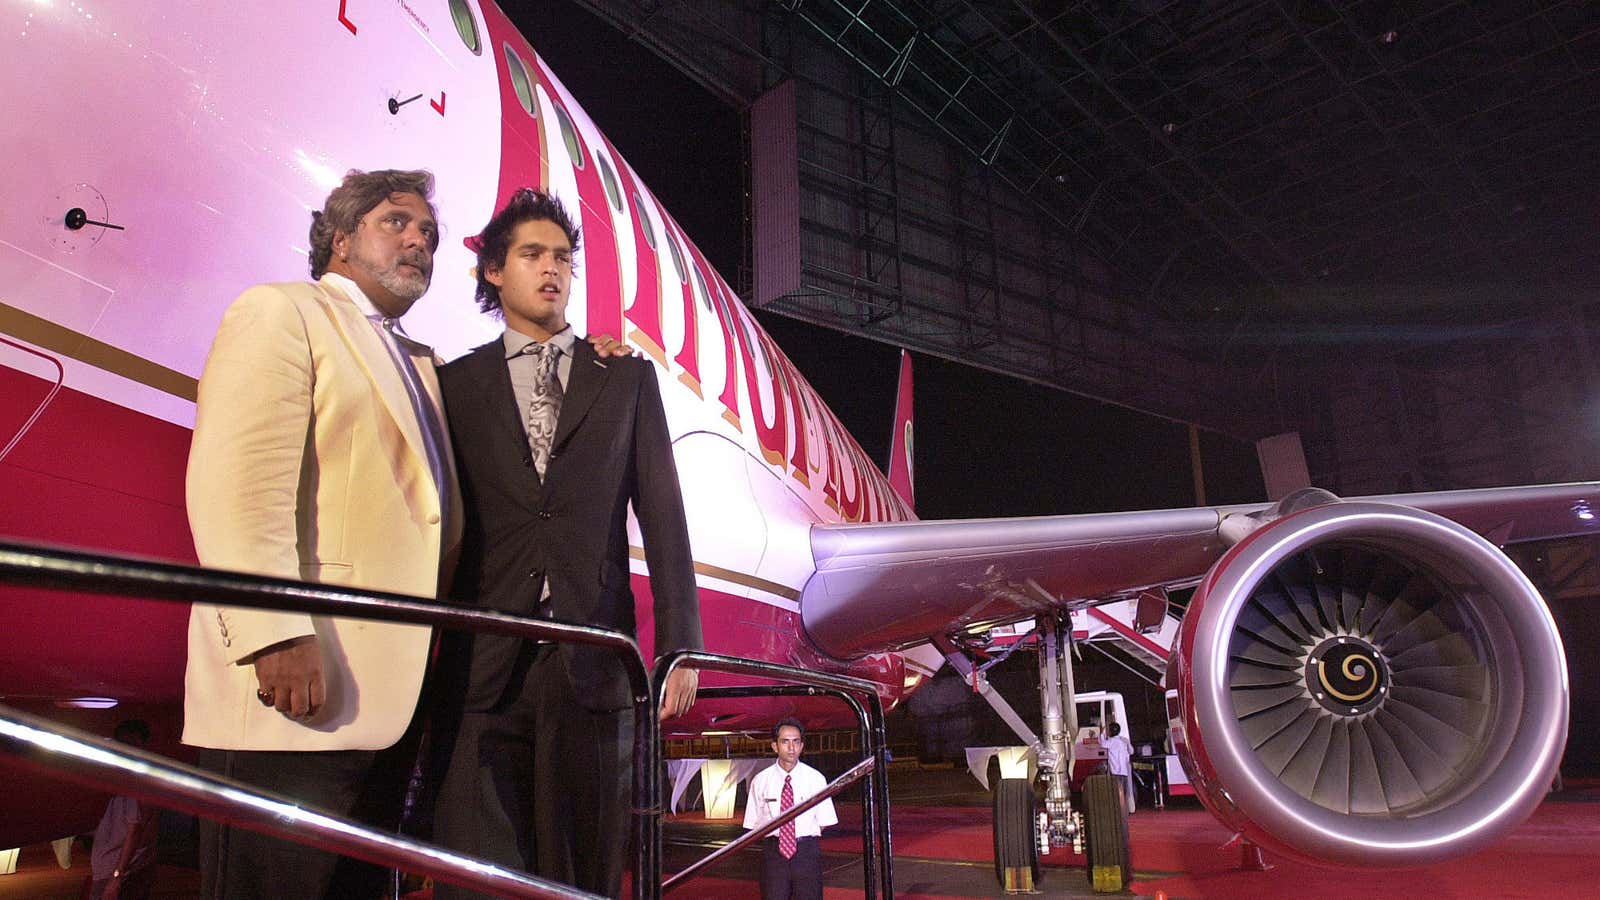 Workers haven’t been paid in months but owner Vijay Mallya and heir-apparent Sid Mallya are still living the high life, according to their own tweets.